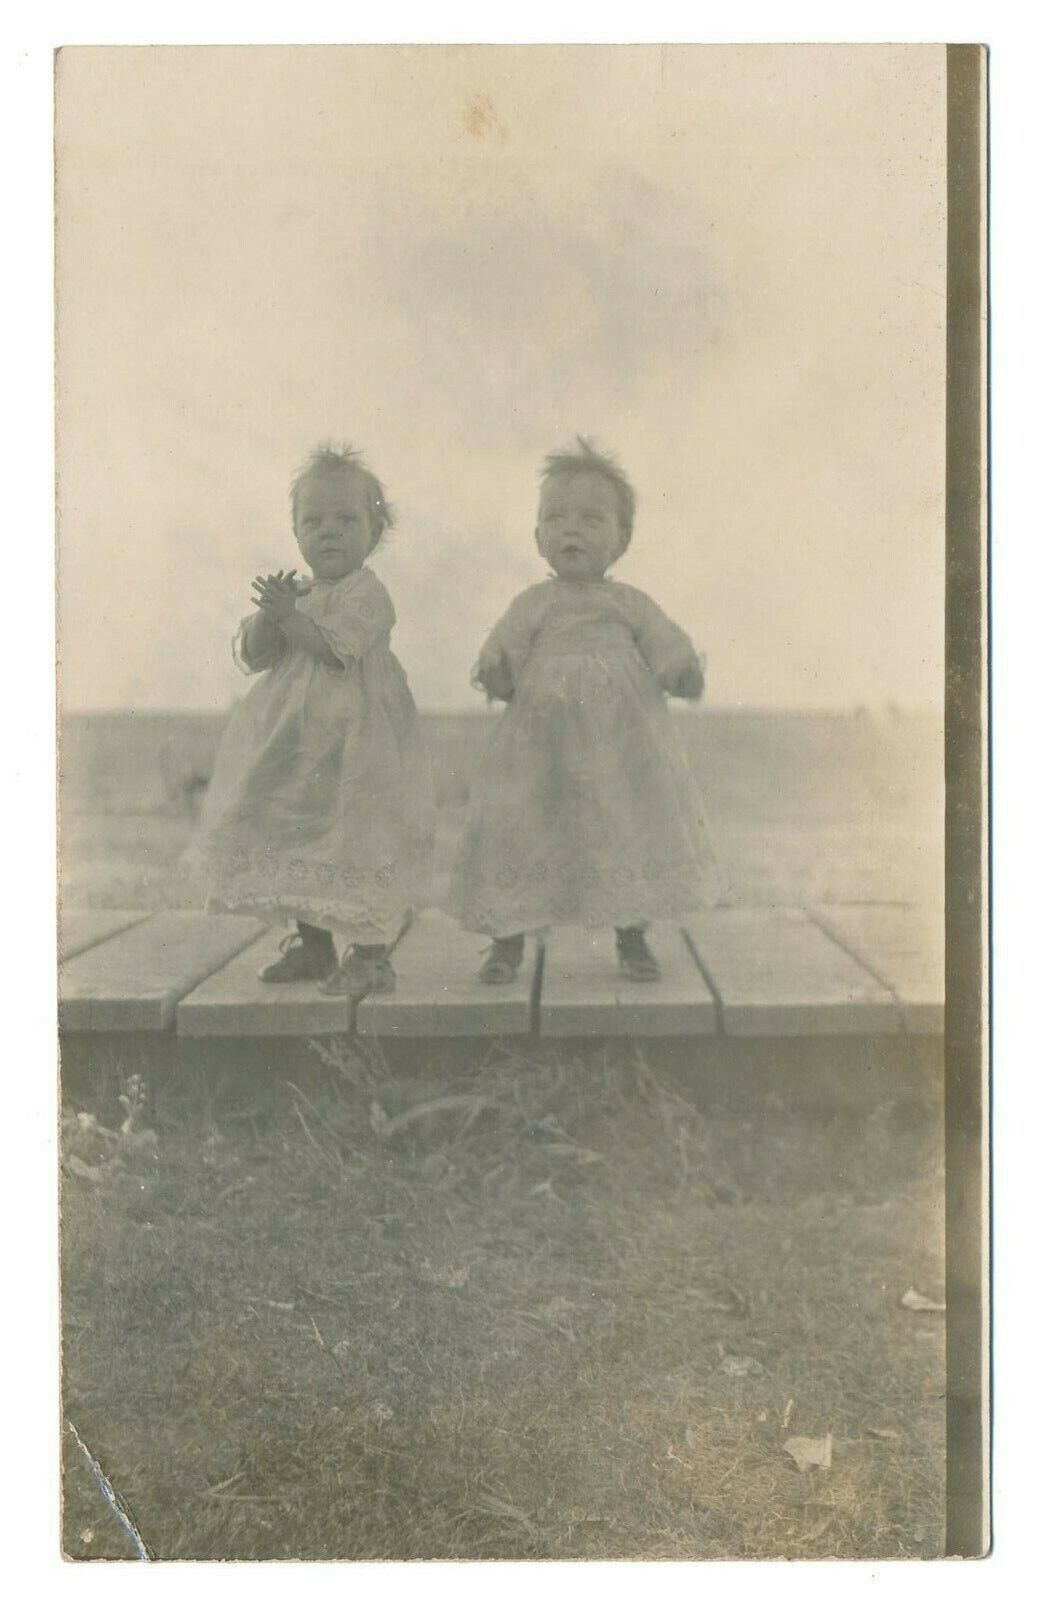 Twins Child\'s Arms Not Fully Formed Birth Defect Photo Postcard Children RPPC